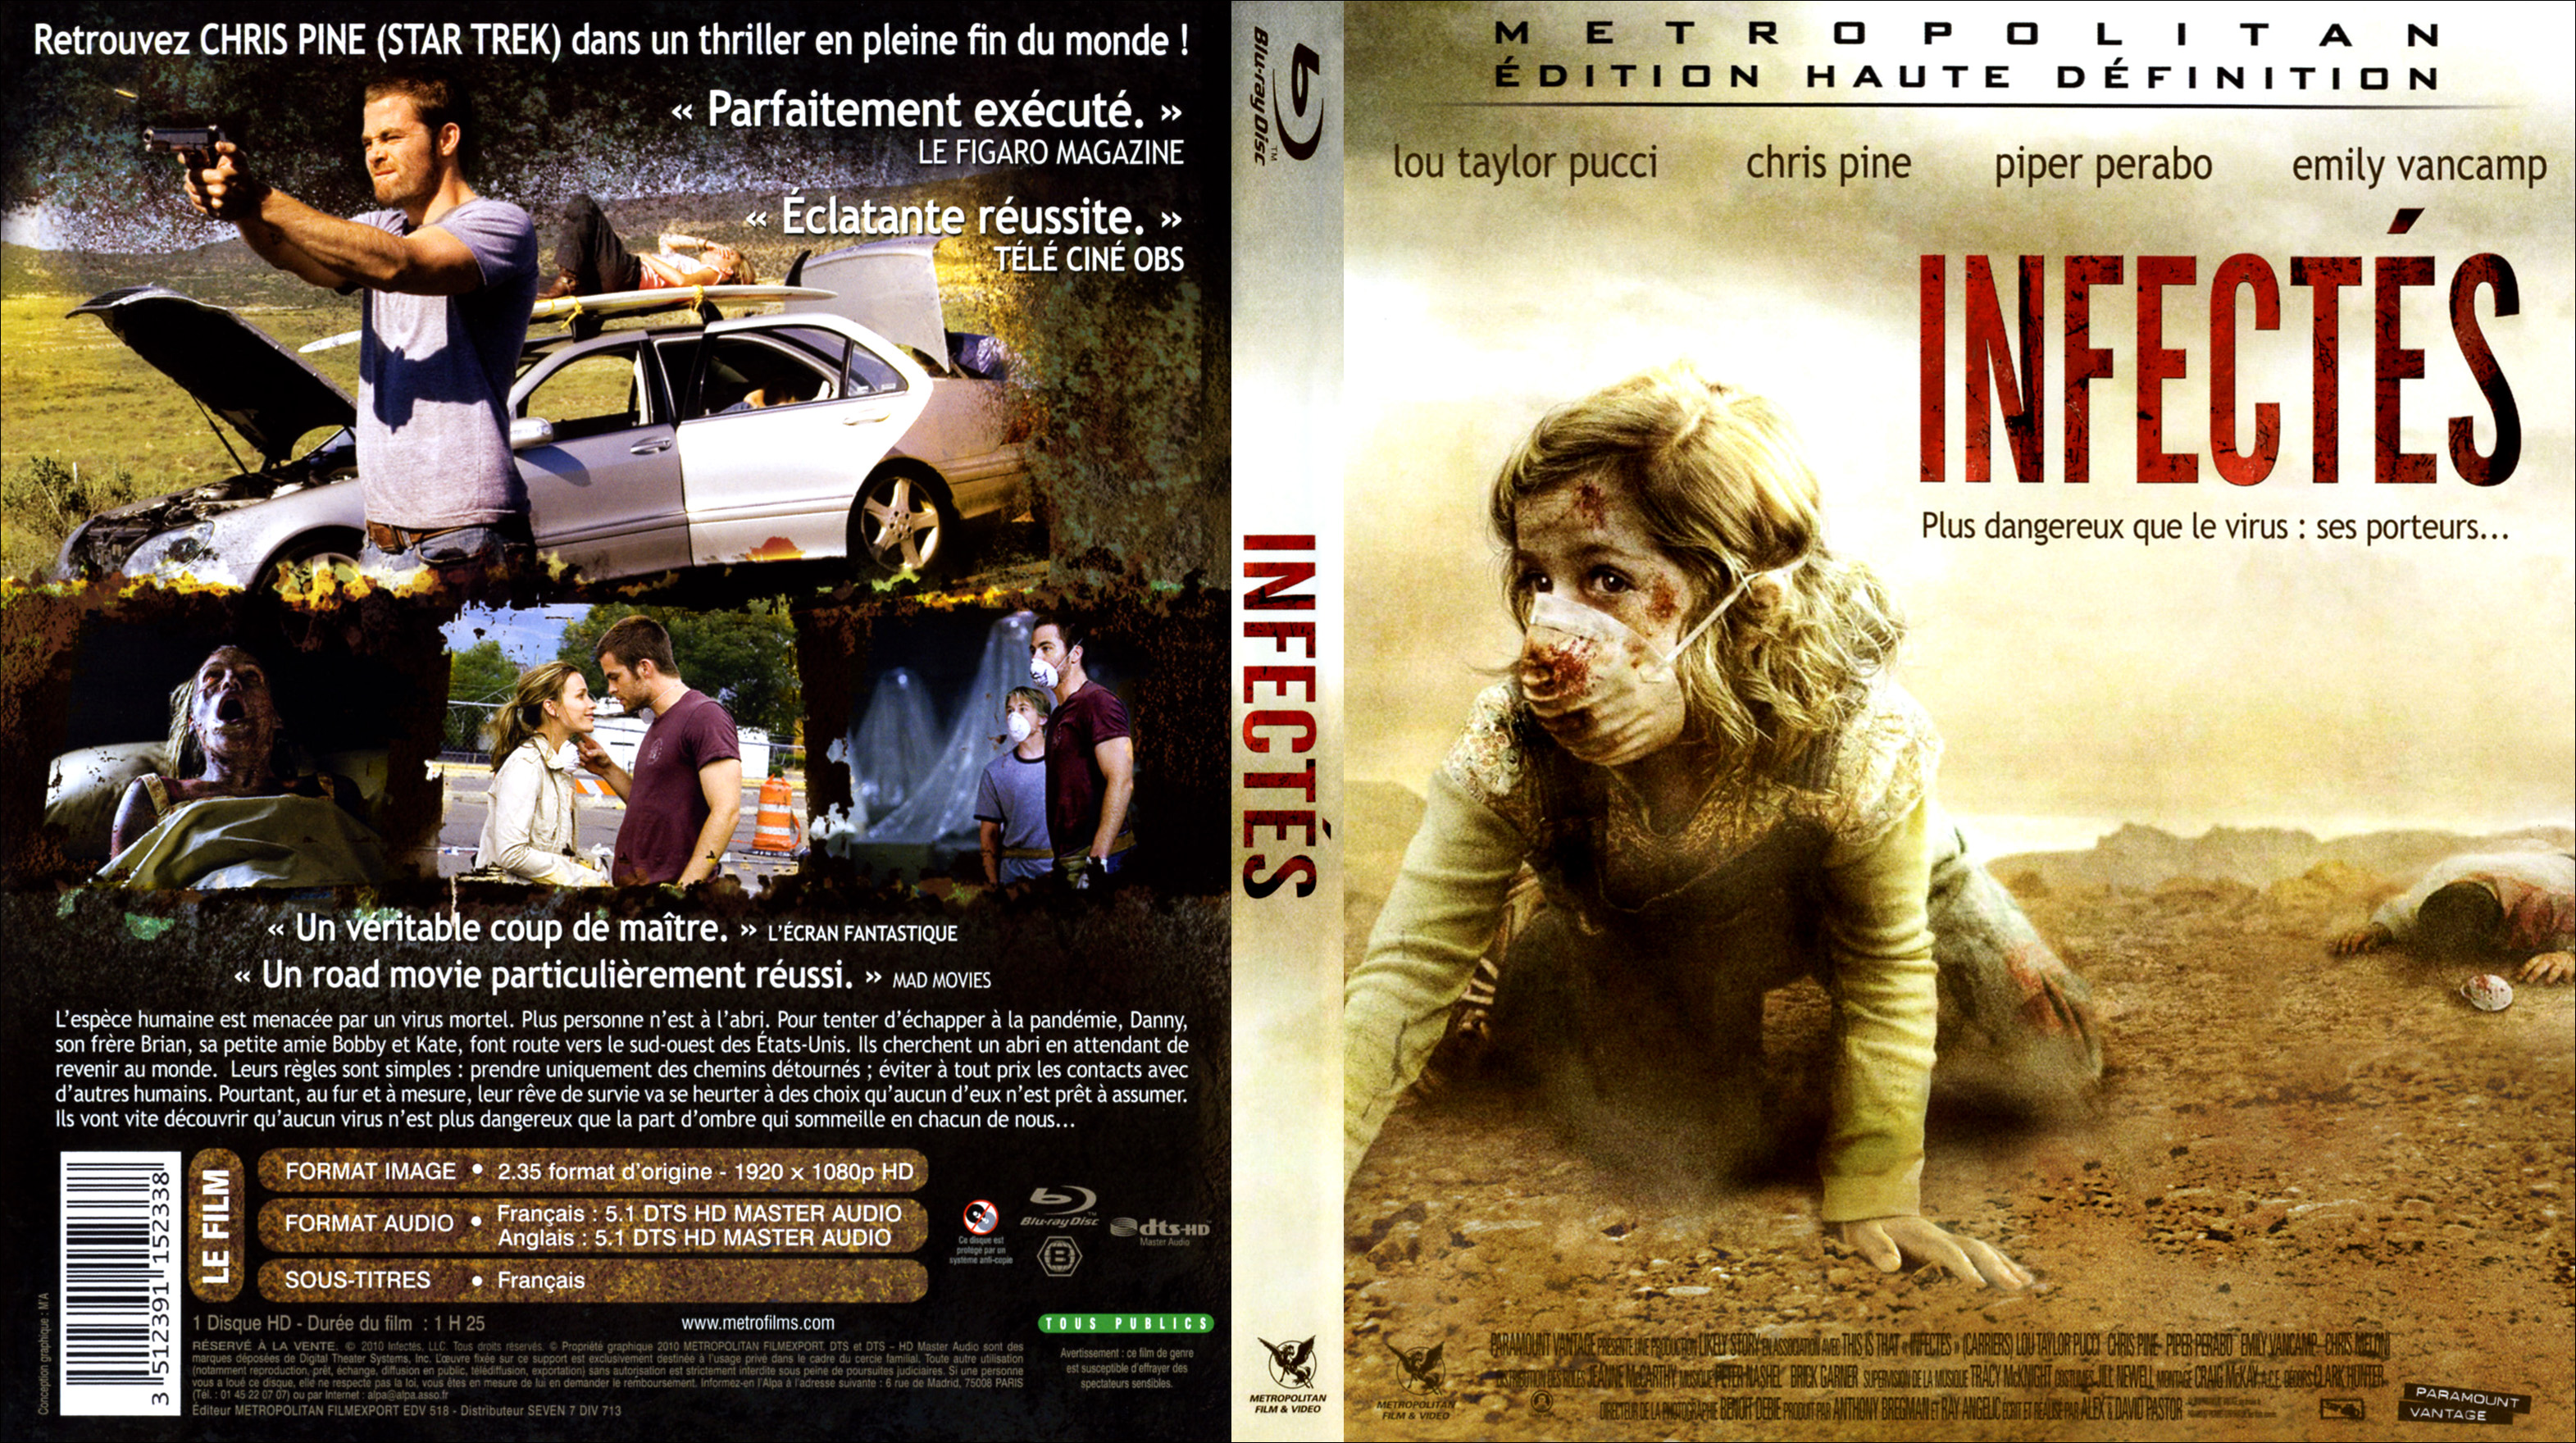 Jaquette DVD Infects (BLU-RAY)